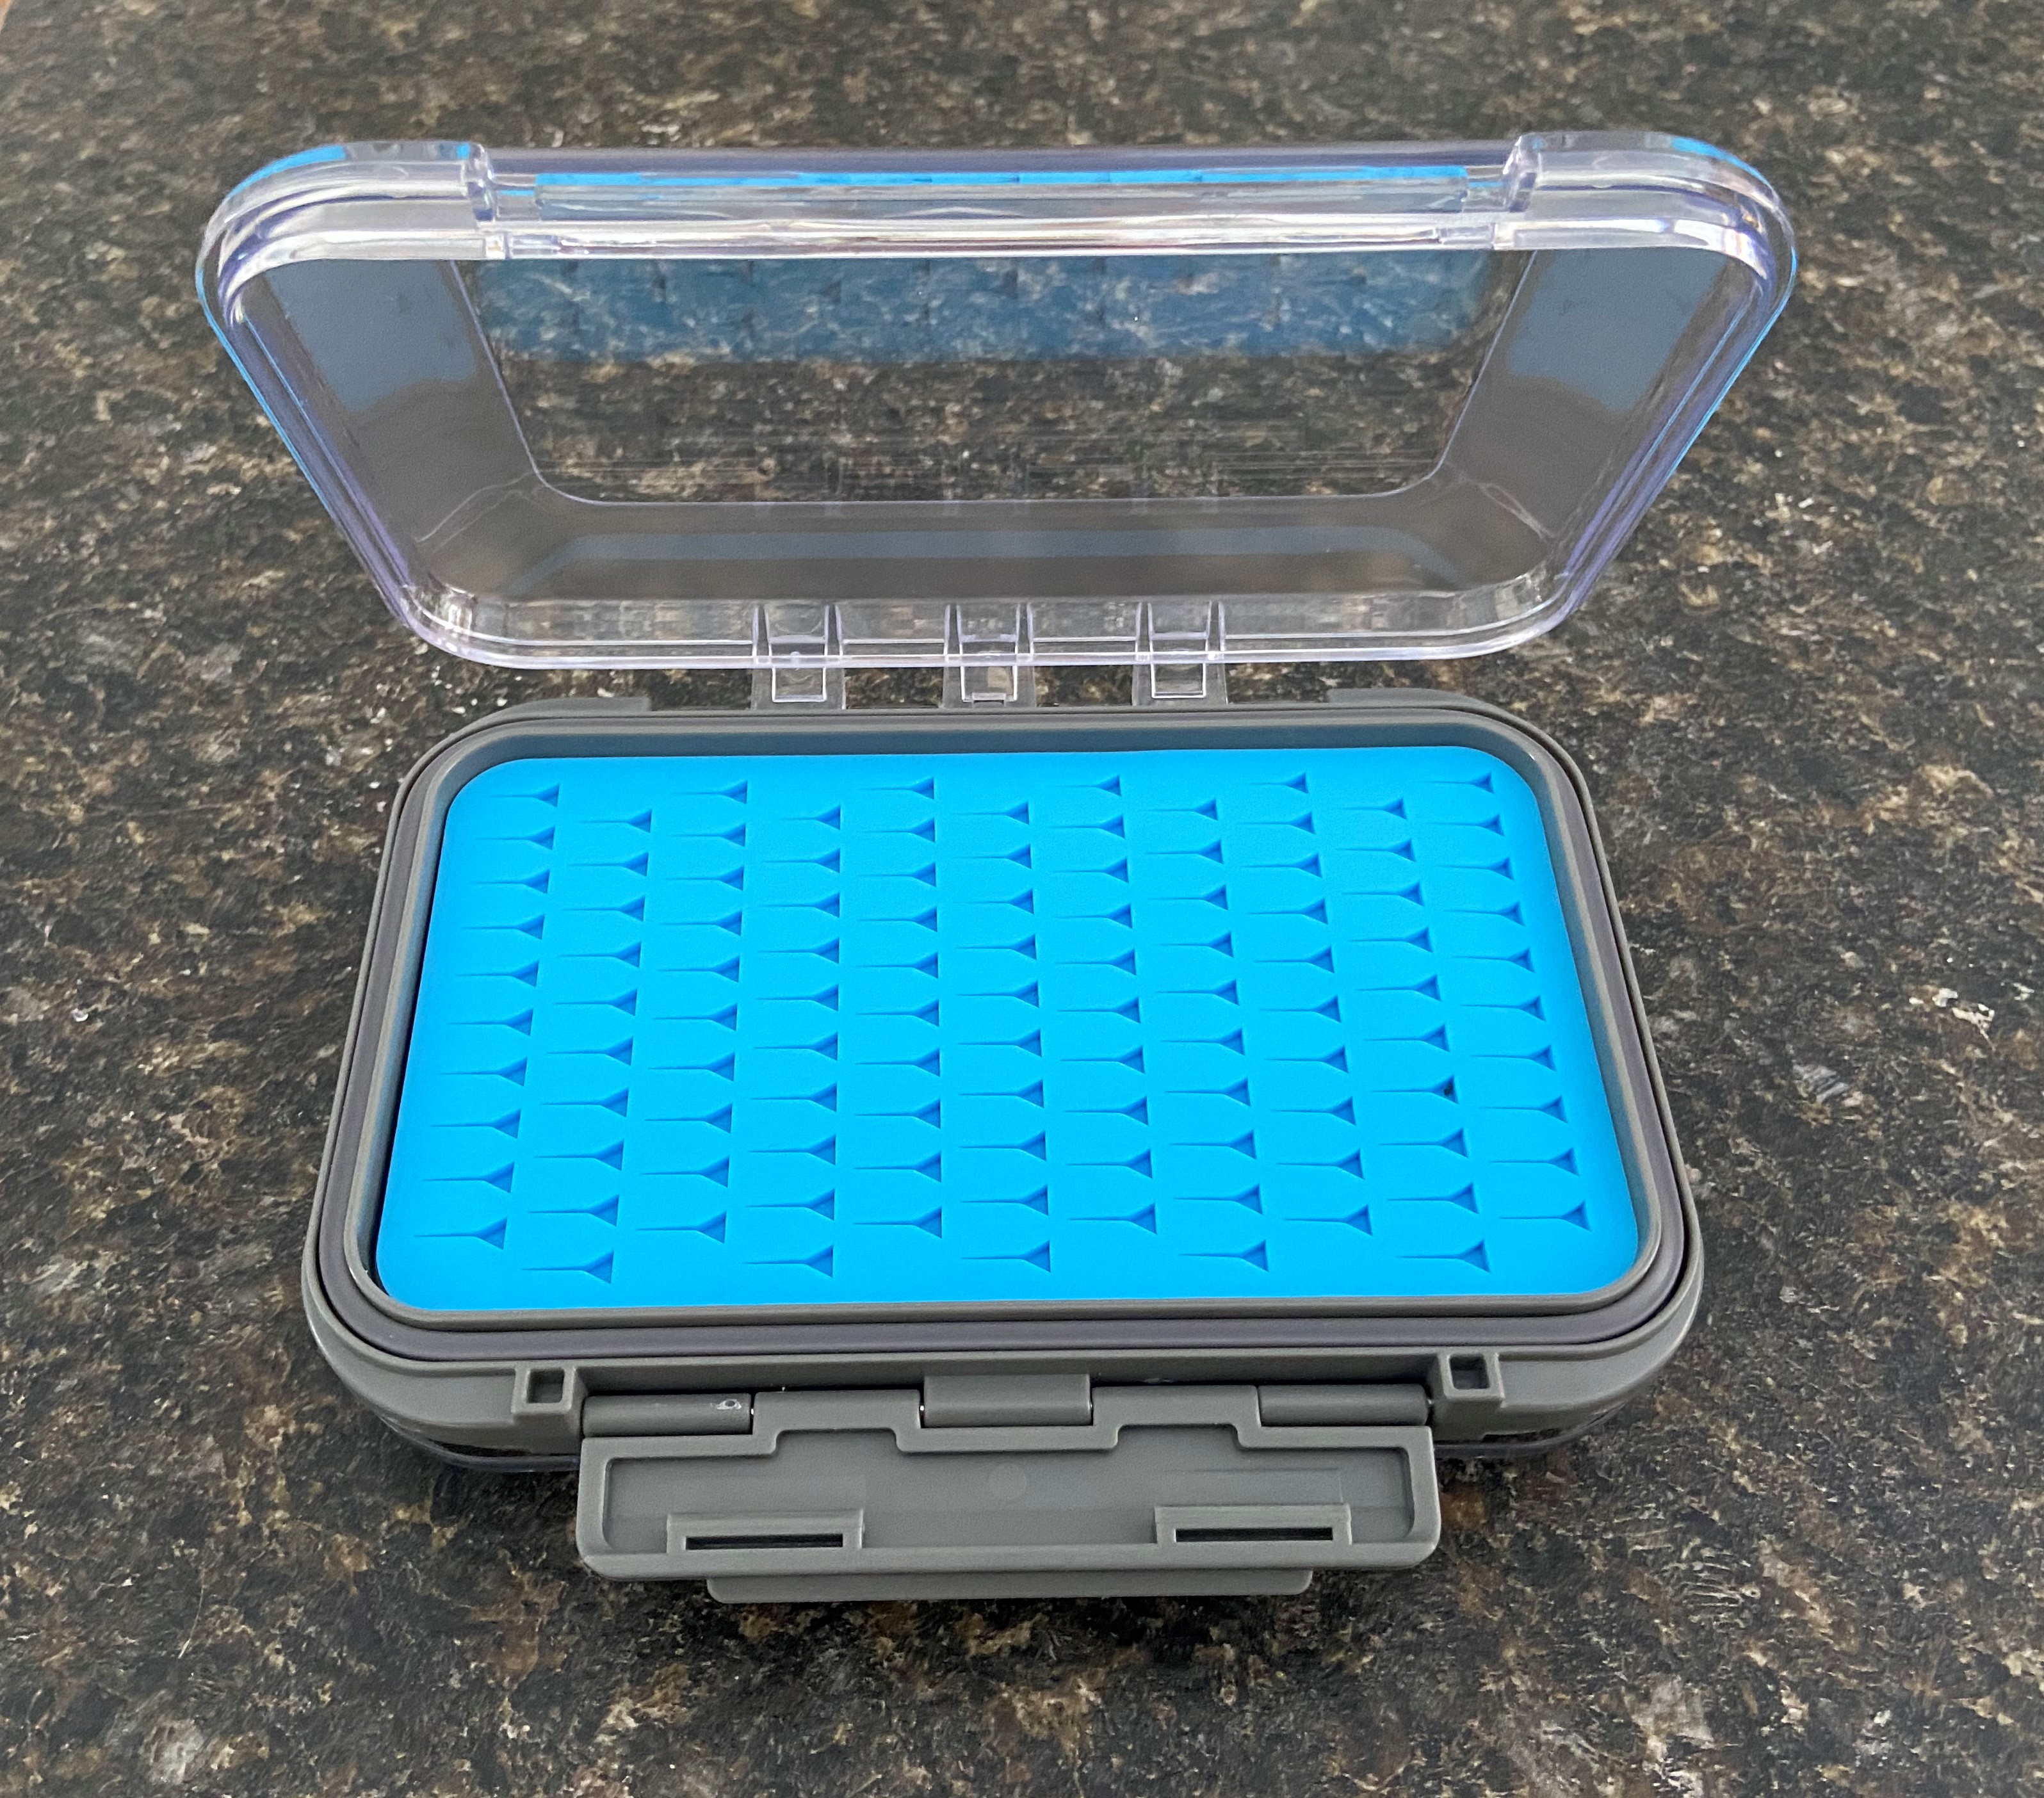 Fly Fishing Box, Two-Sided Waterproof Dry Fly Box India | Ubuy